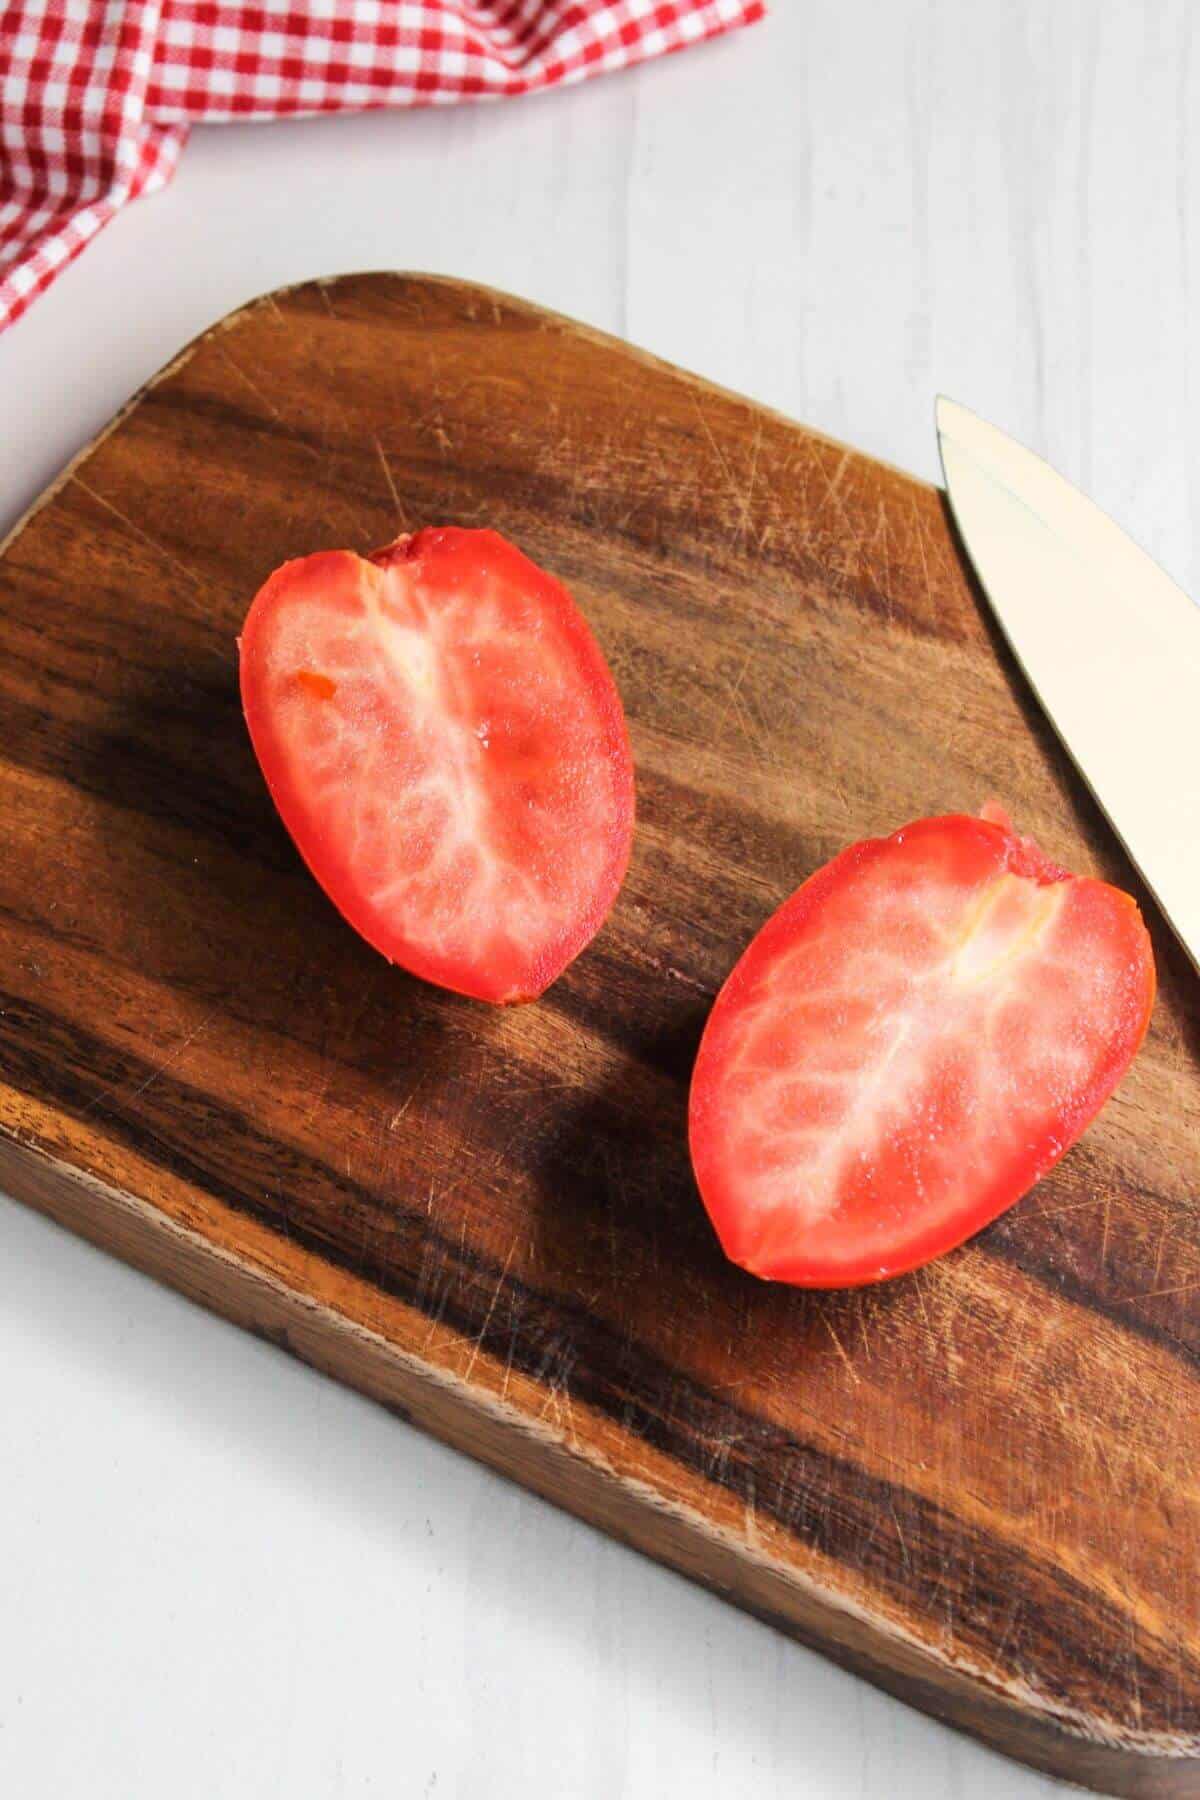 Two tomatoes on a cutting board with a knife.